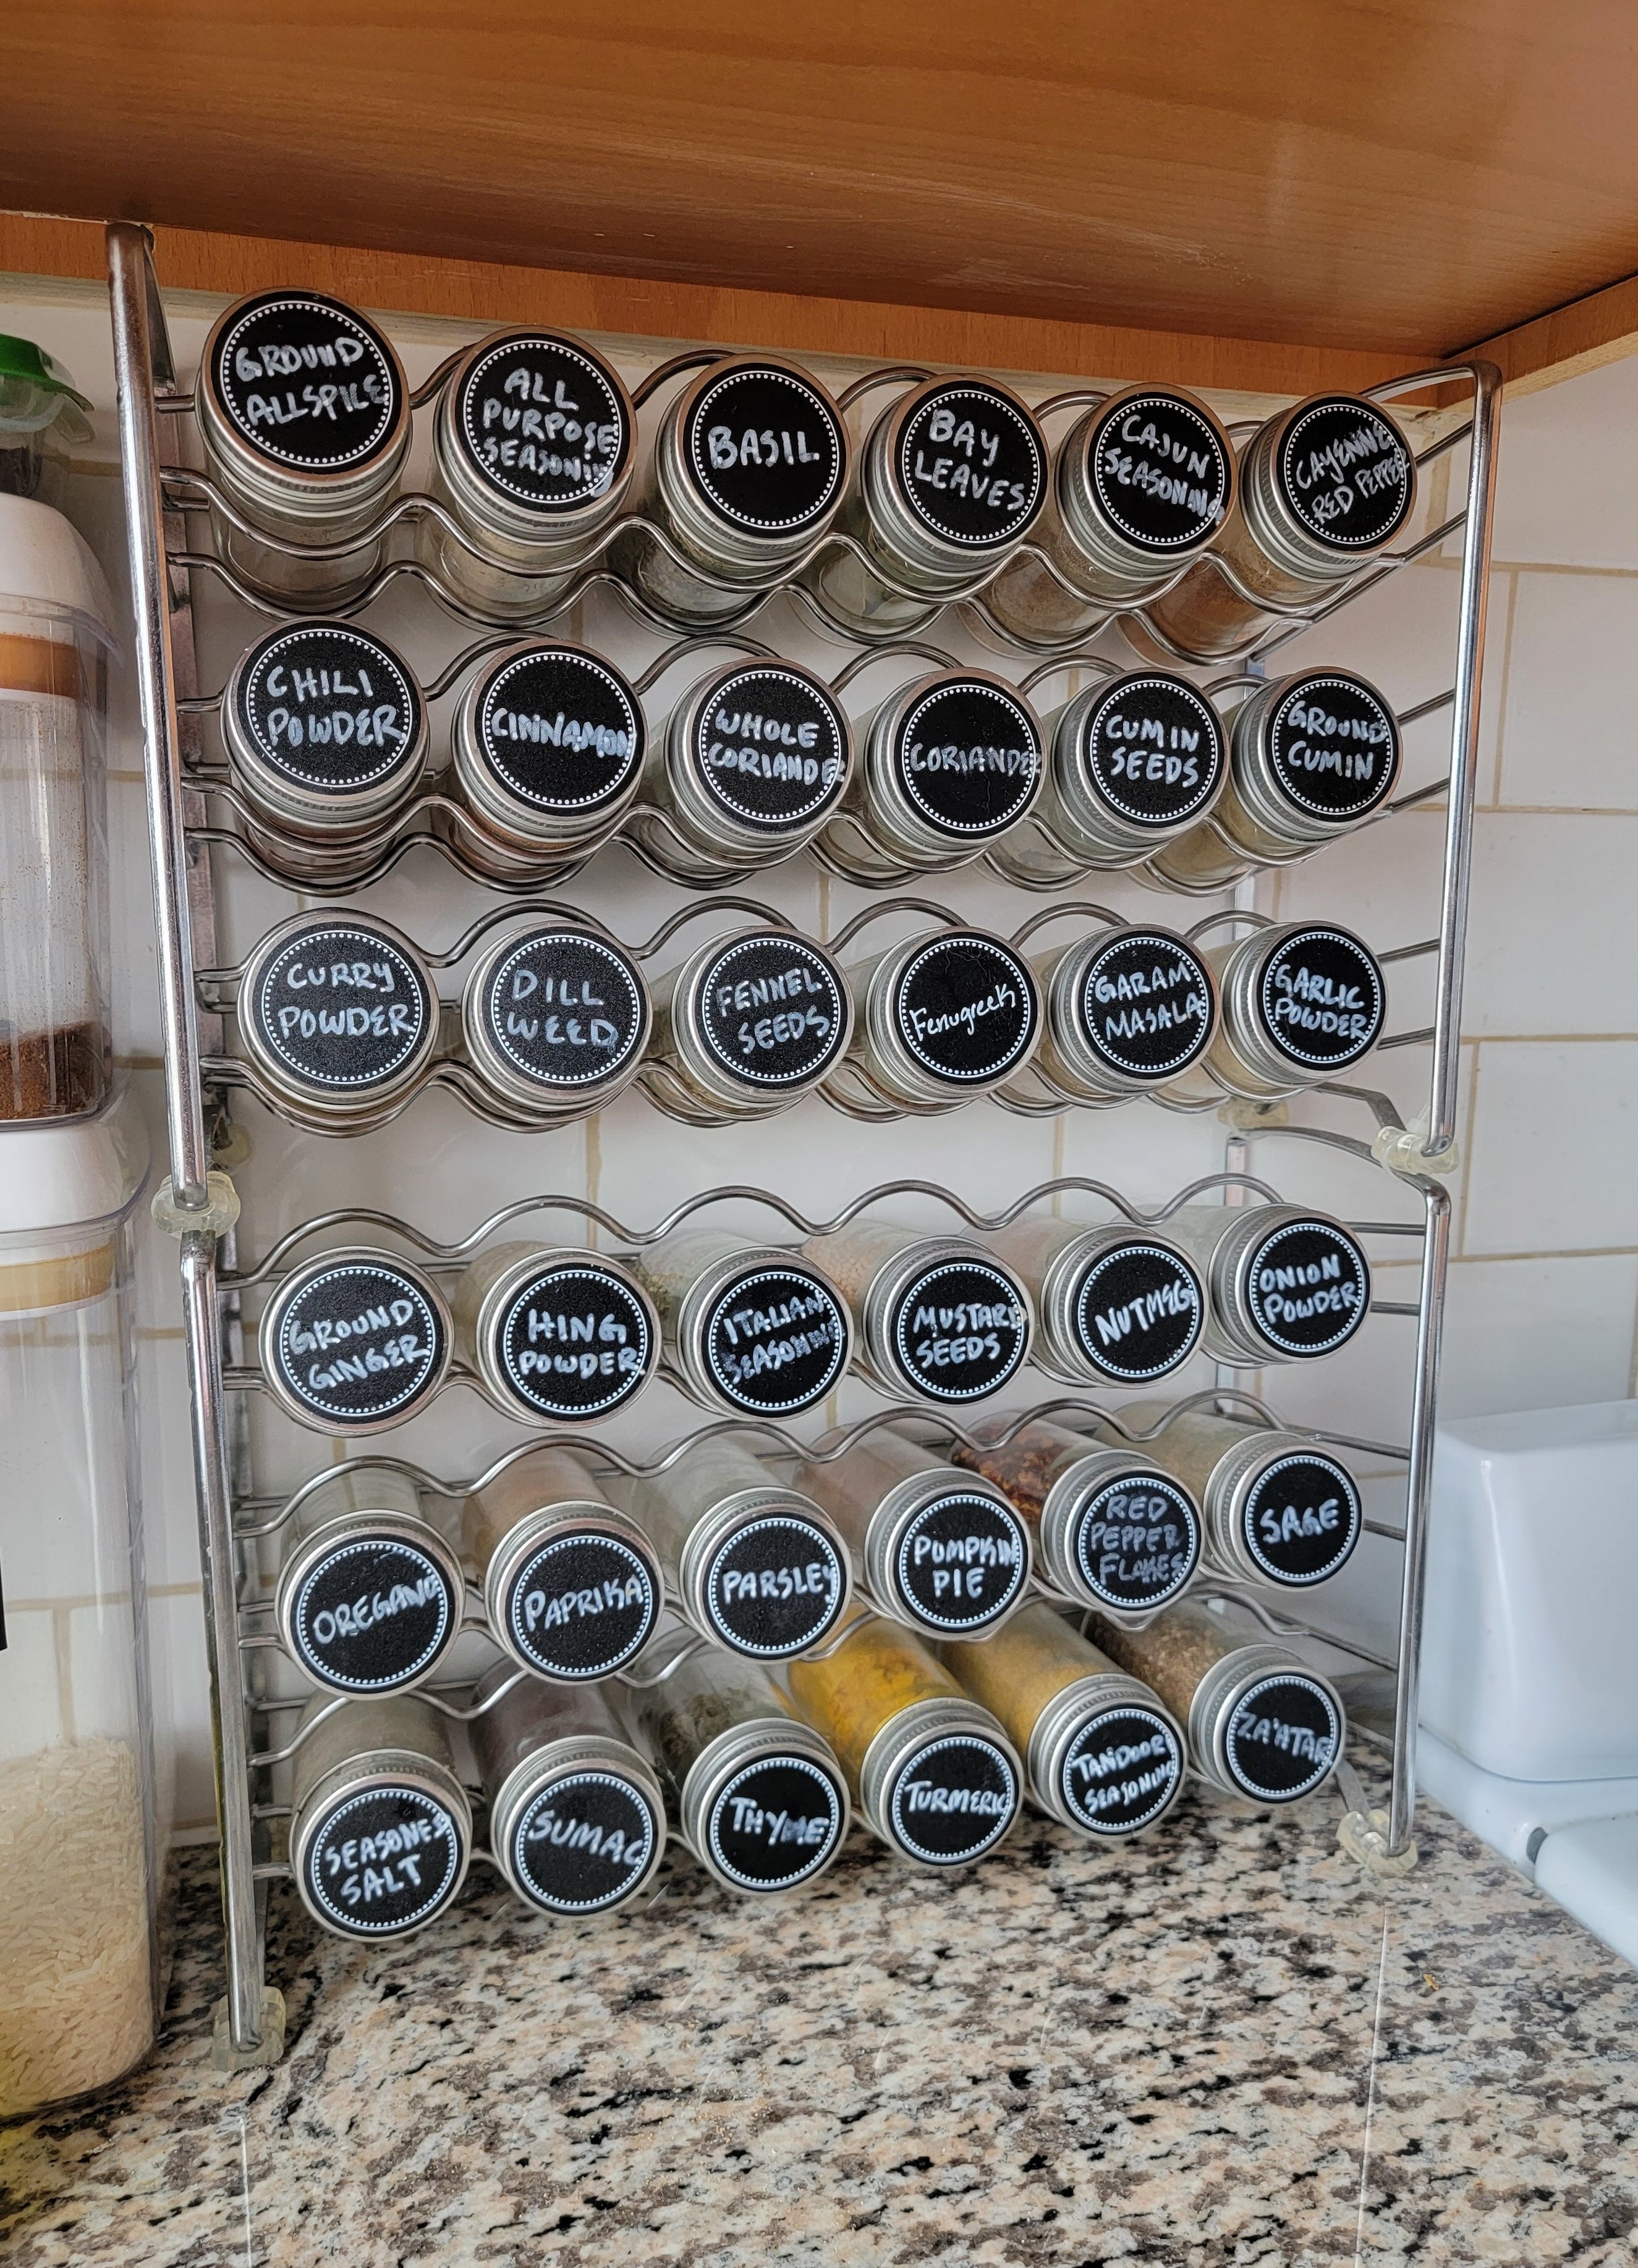 spice rack with labels for each spice on the lids facing forward